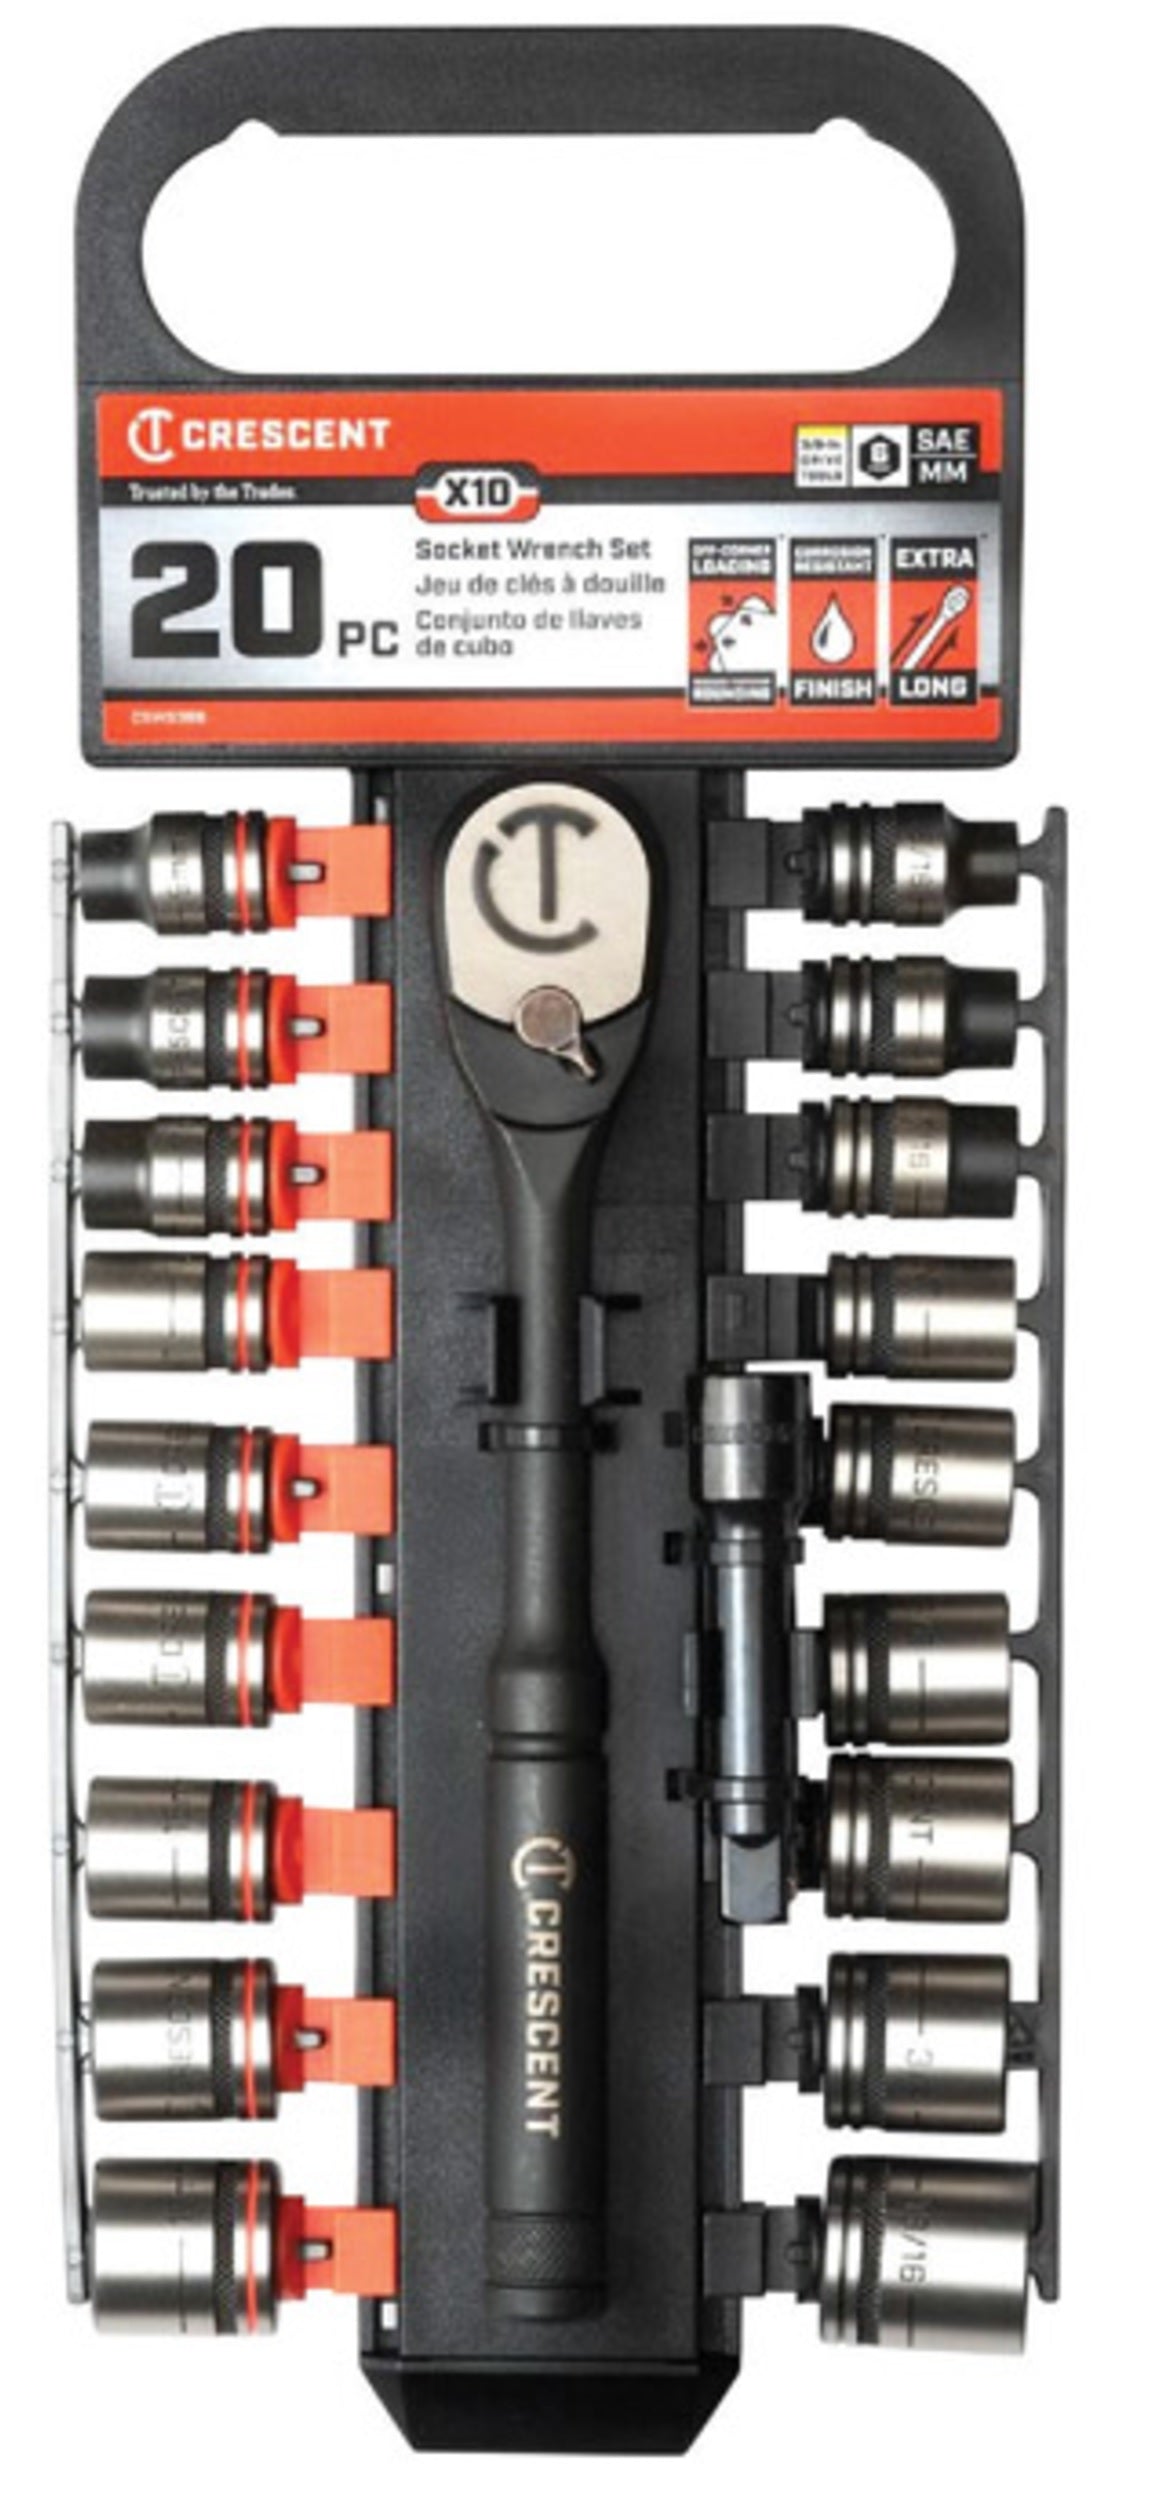 Crescent CSWS12B X10 Metric and SAE Socket Wrench Set, Black Oxide